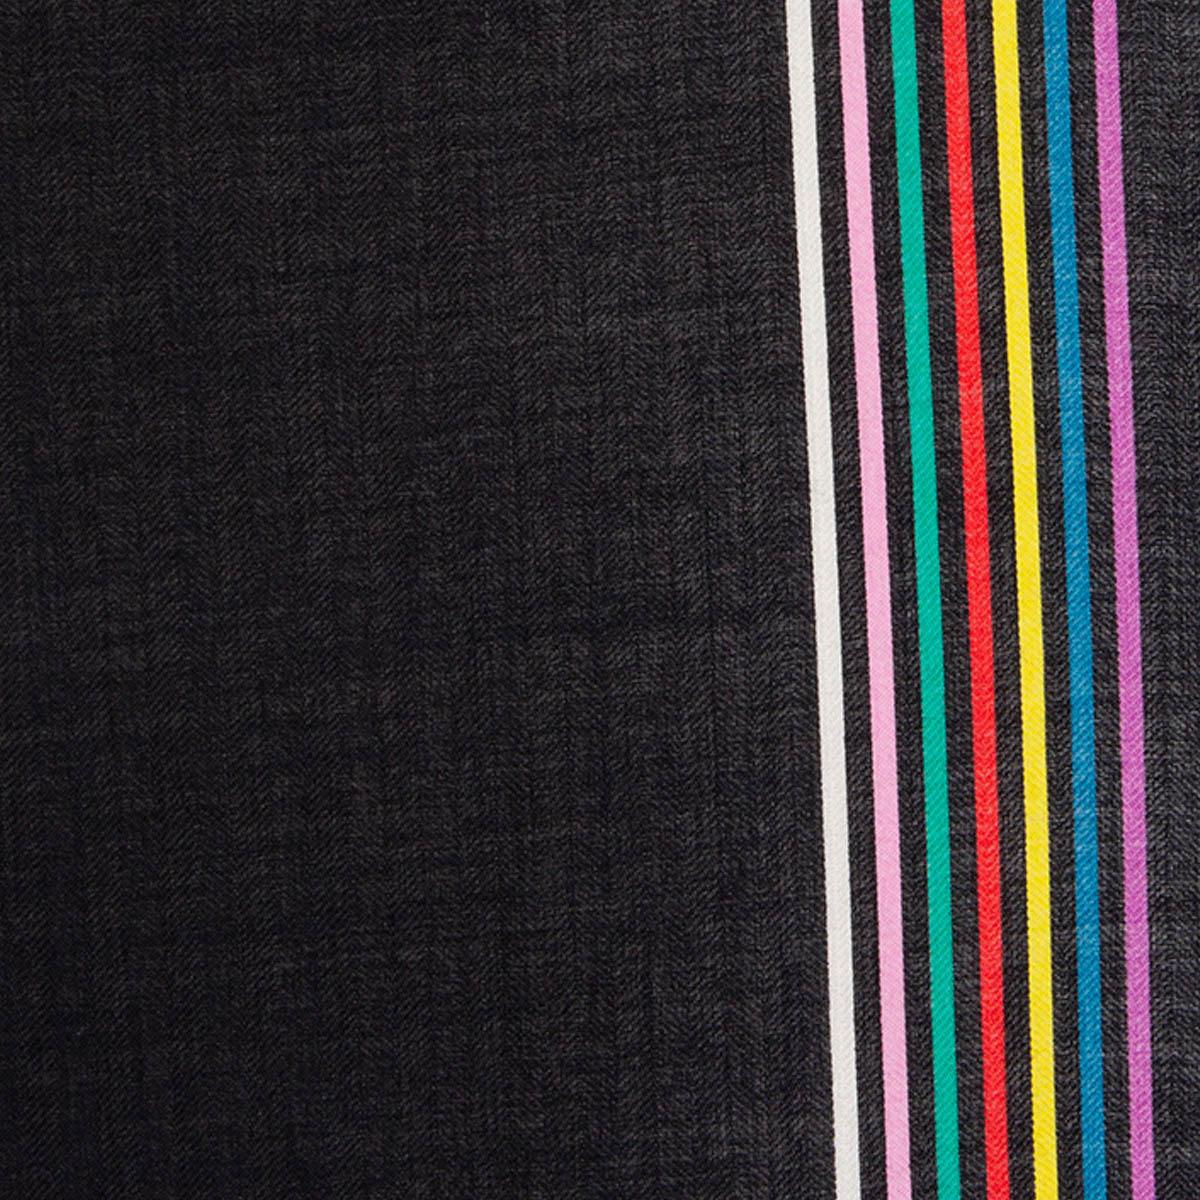 100% authentic Hermes 'Encadre Liste au Fil 140' shawl in black cashmere (70%) and silk (30%) with white H and multicolor border. Has been carried and is in excellent condition.

Measurements
Width	140cm (54.6in)
Length	140cm (54.6in)

All our